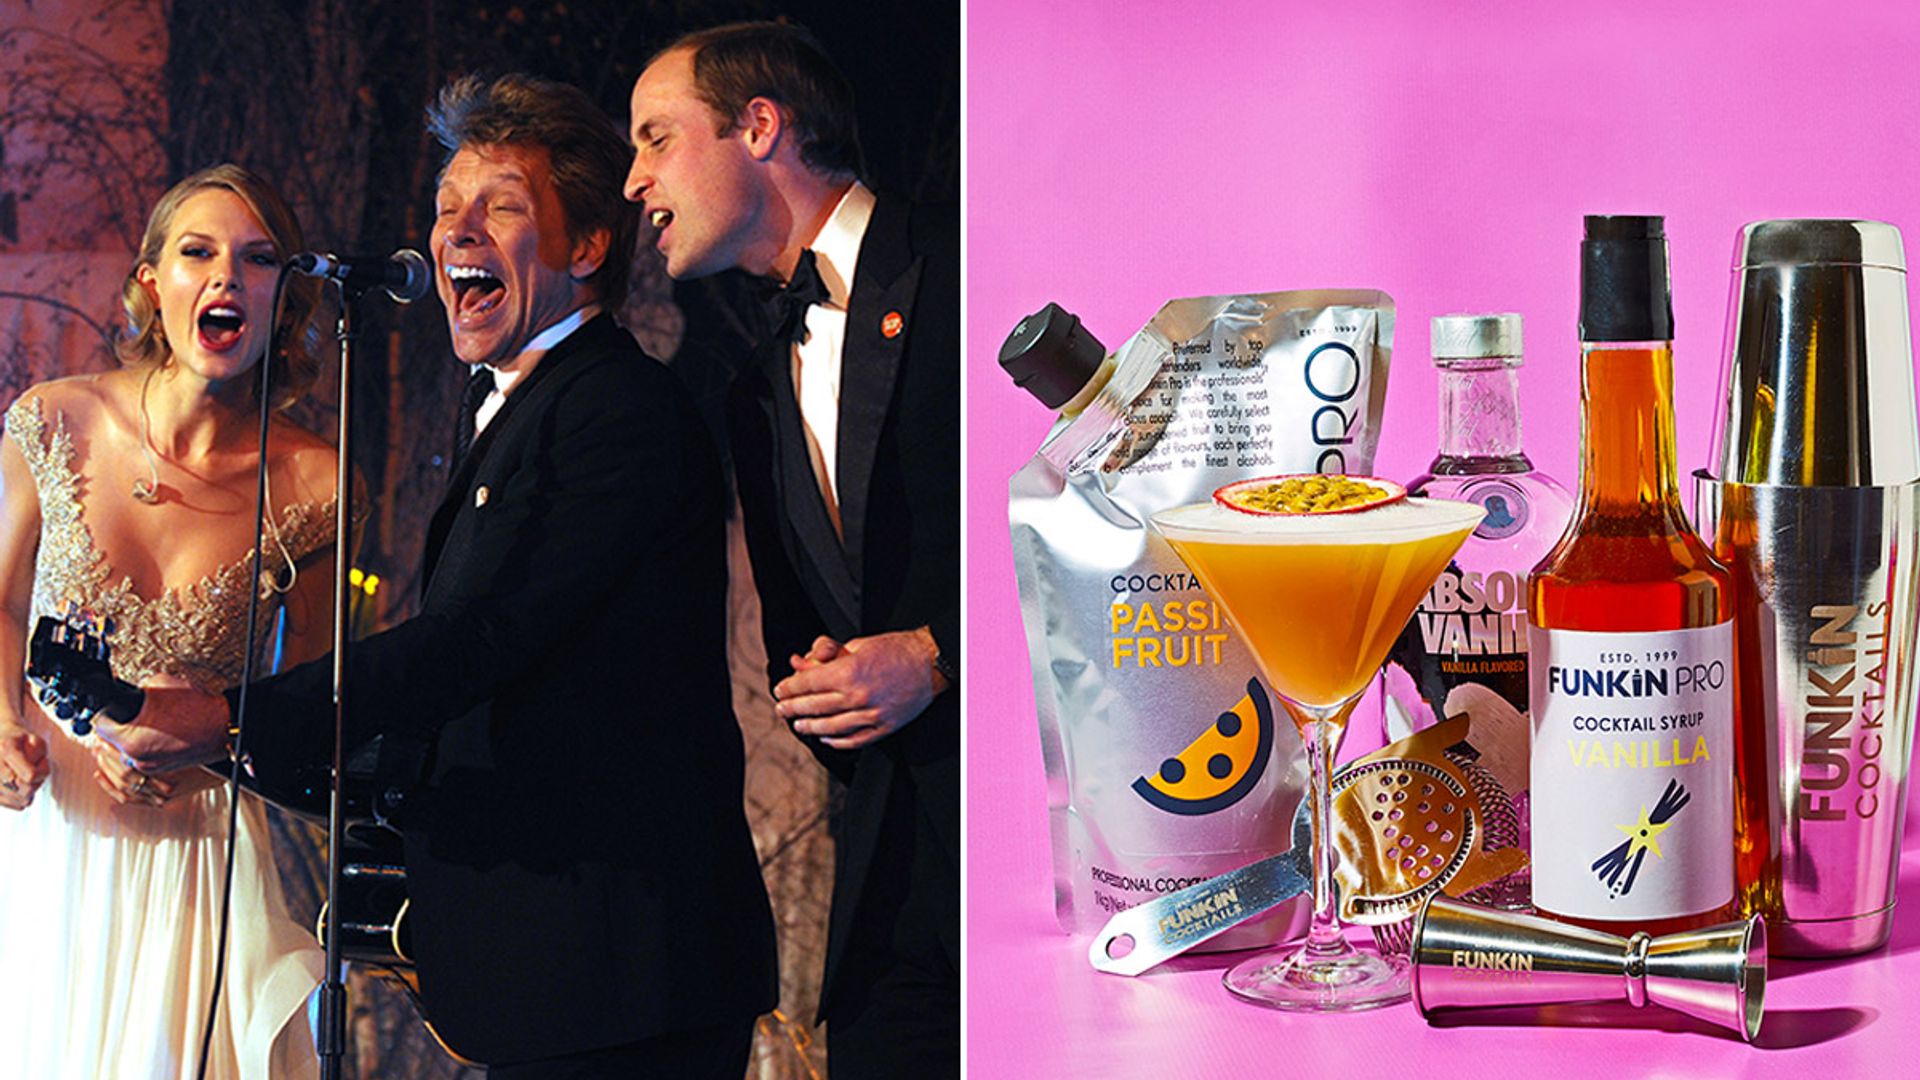 Your virtual Christmas party is saved! Here’s how to do cocktails and karaoke at home